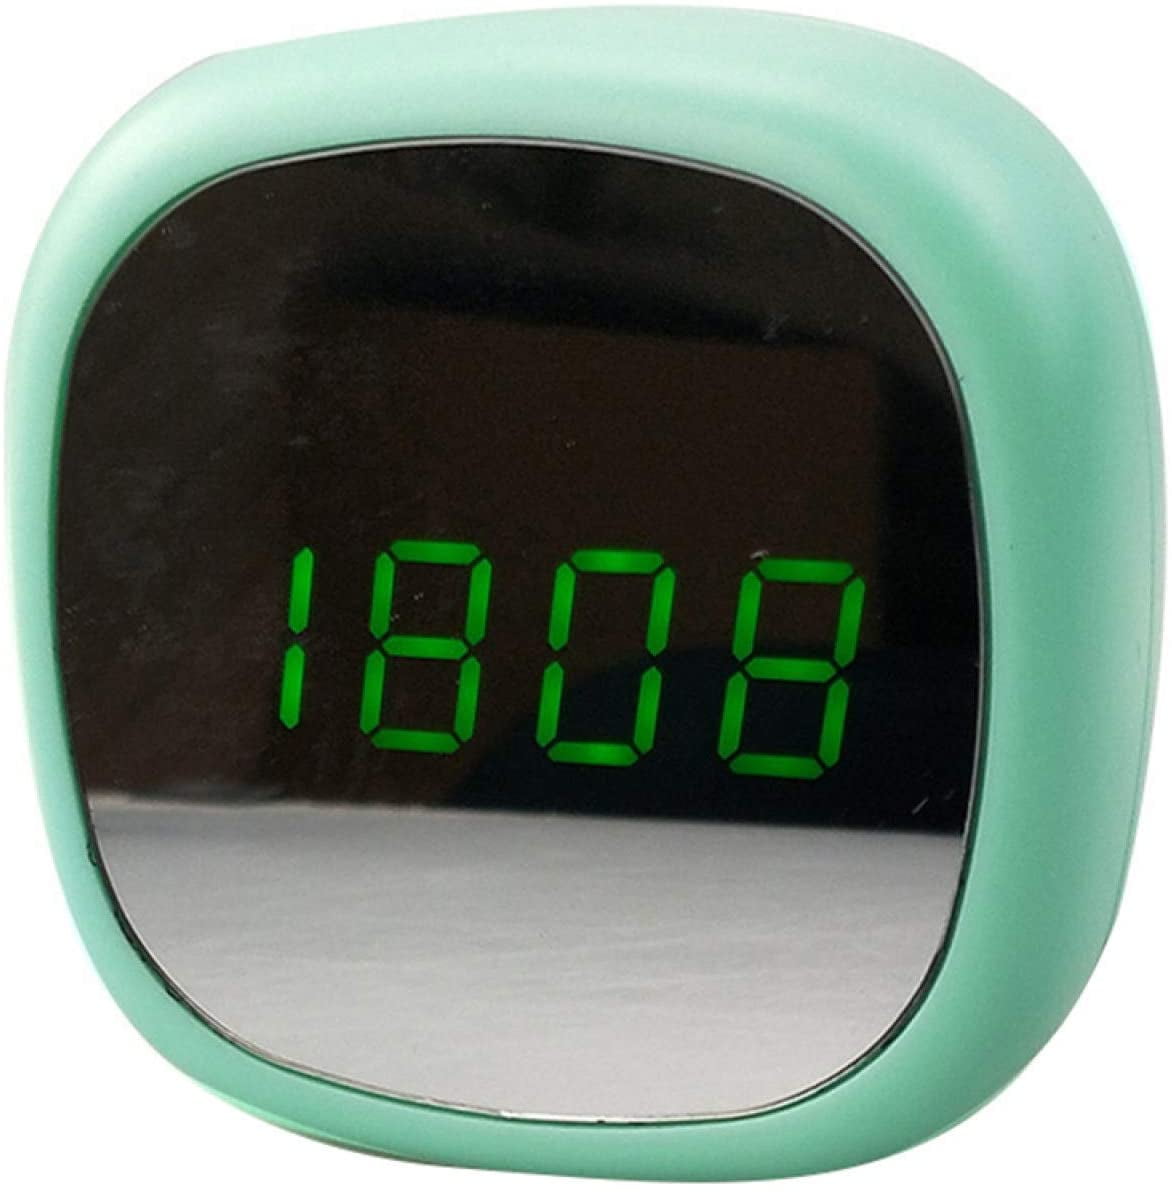 LED Digital Display Alarm Clock,Makeup Mirror Clock Thermometer,Easy to Set, USB Chargers, Night Light for Kids - Walmart.com